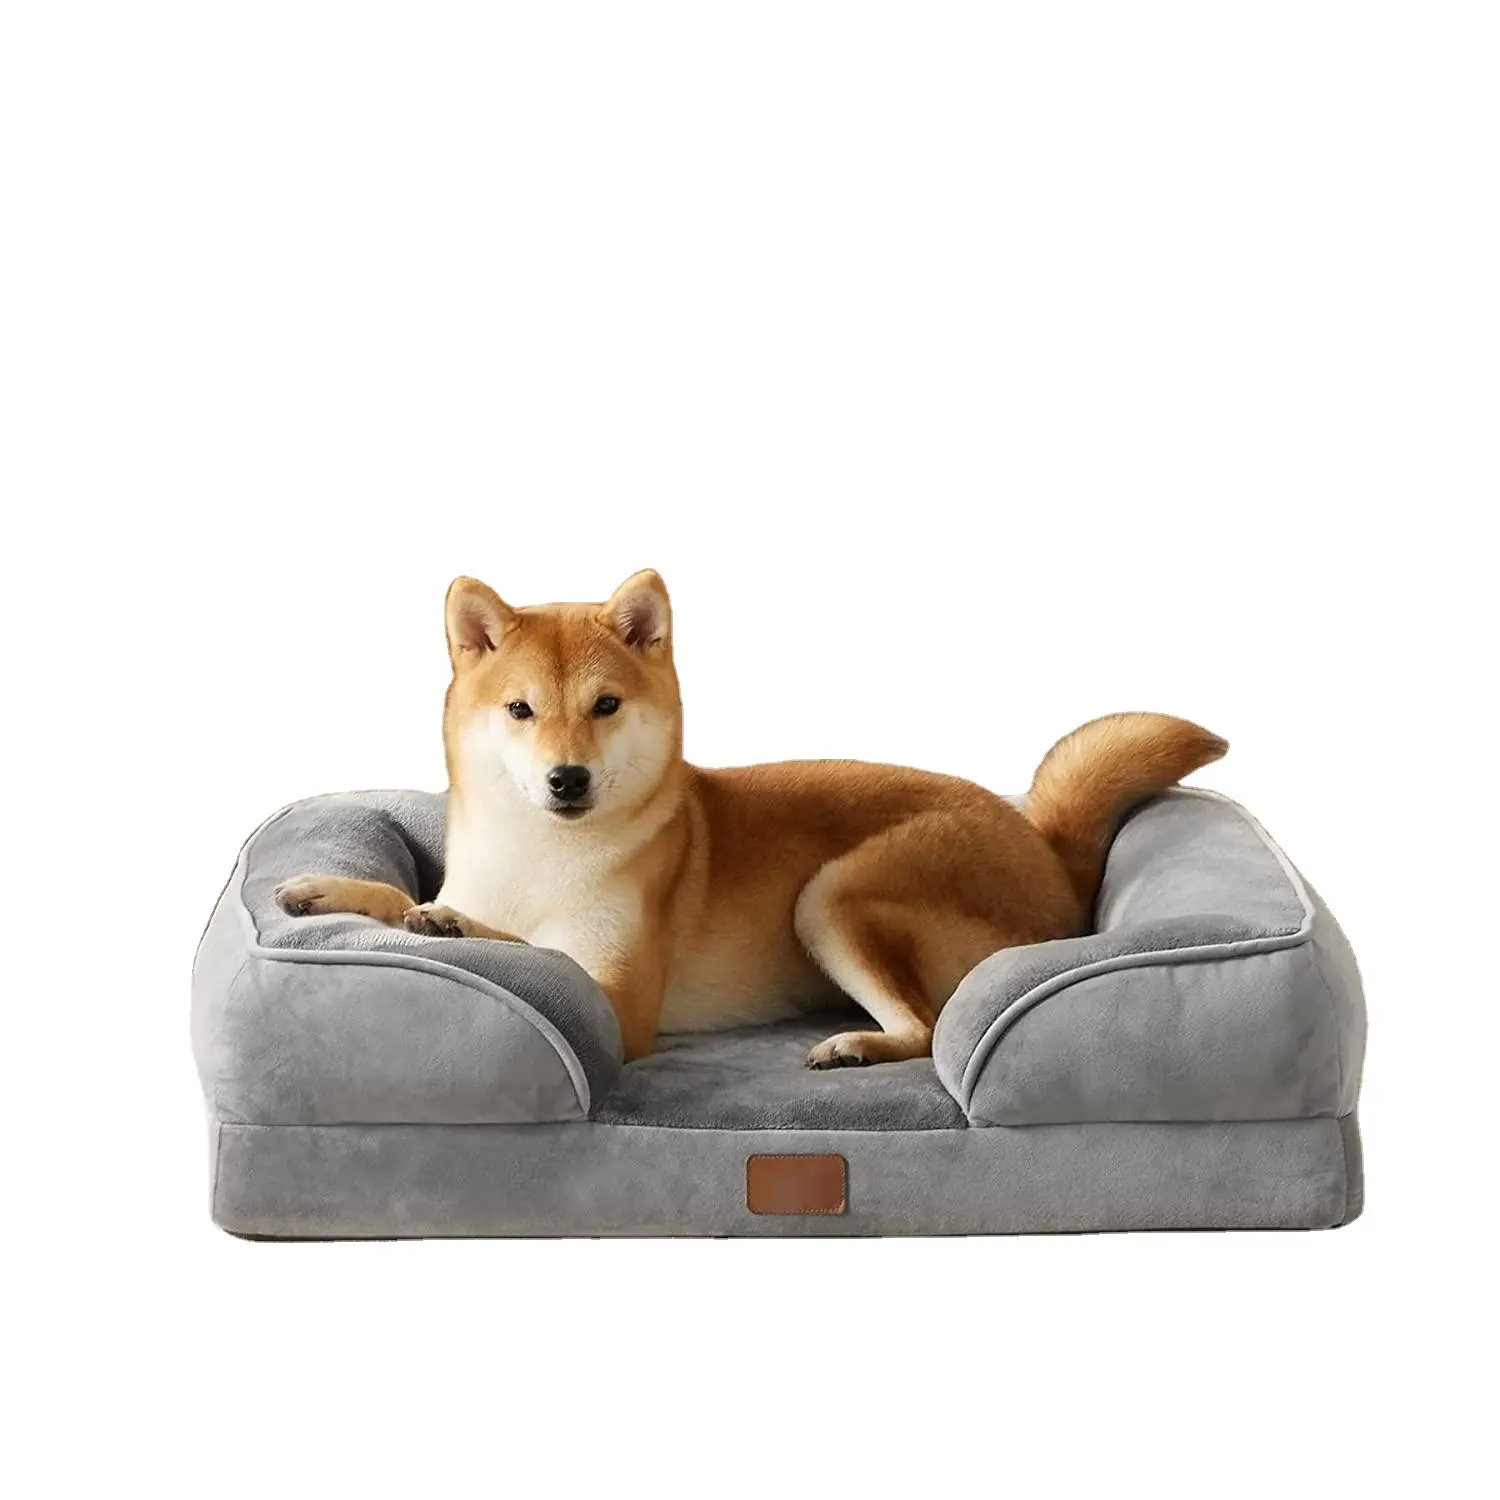 Pet Furniture Supplies Egg-crate Foam Orthopedic Dog Bed for Large Dogs with Non-slip Bottom and Waterproof Washable Cover